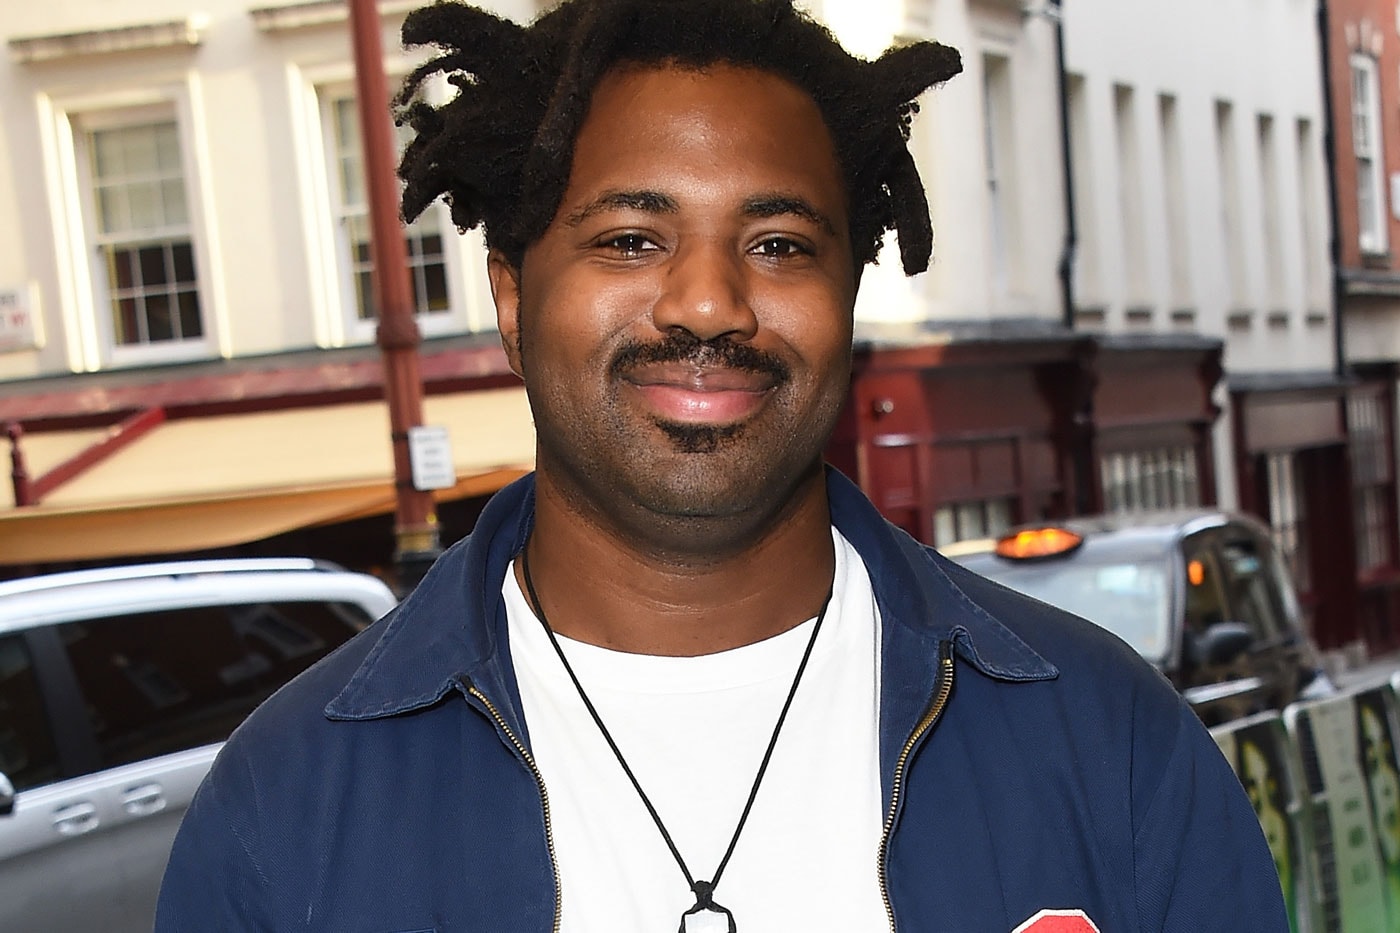 Sampha Made His Solo TV Debut on 'Colbert' Last Night